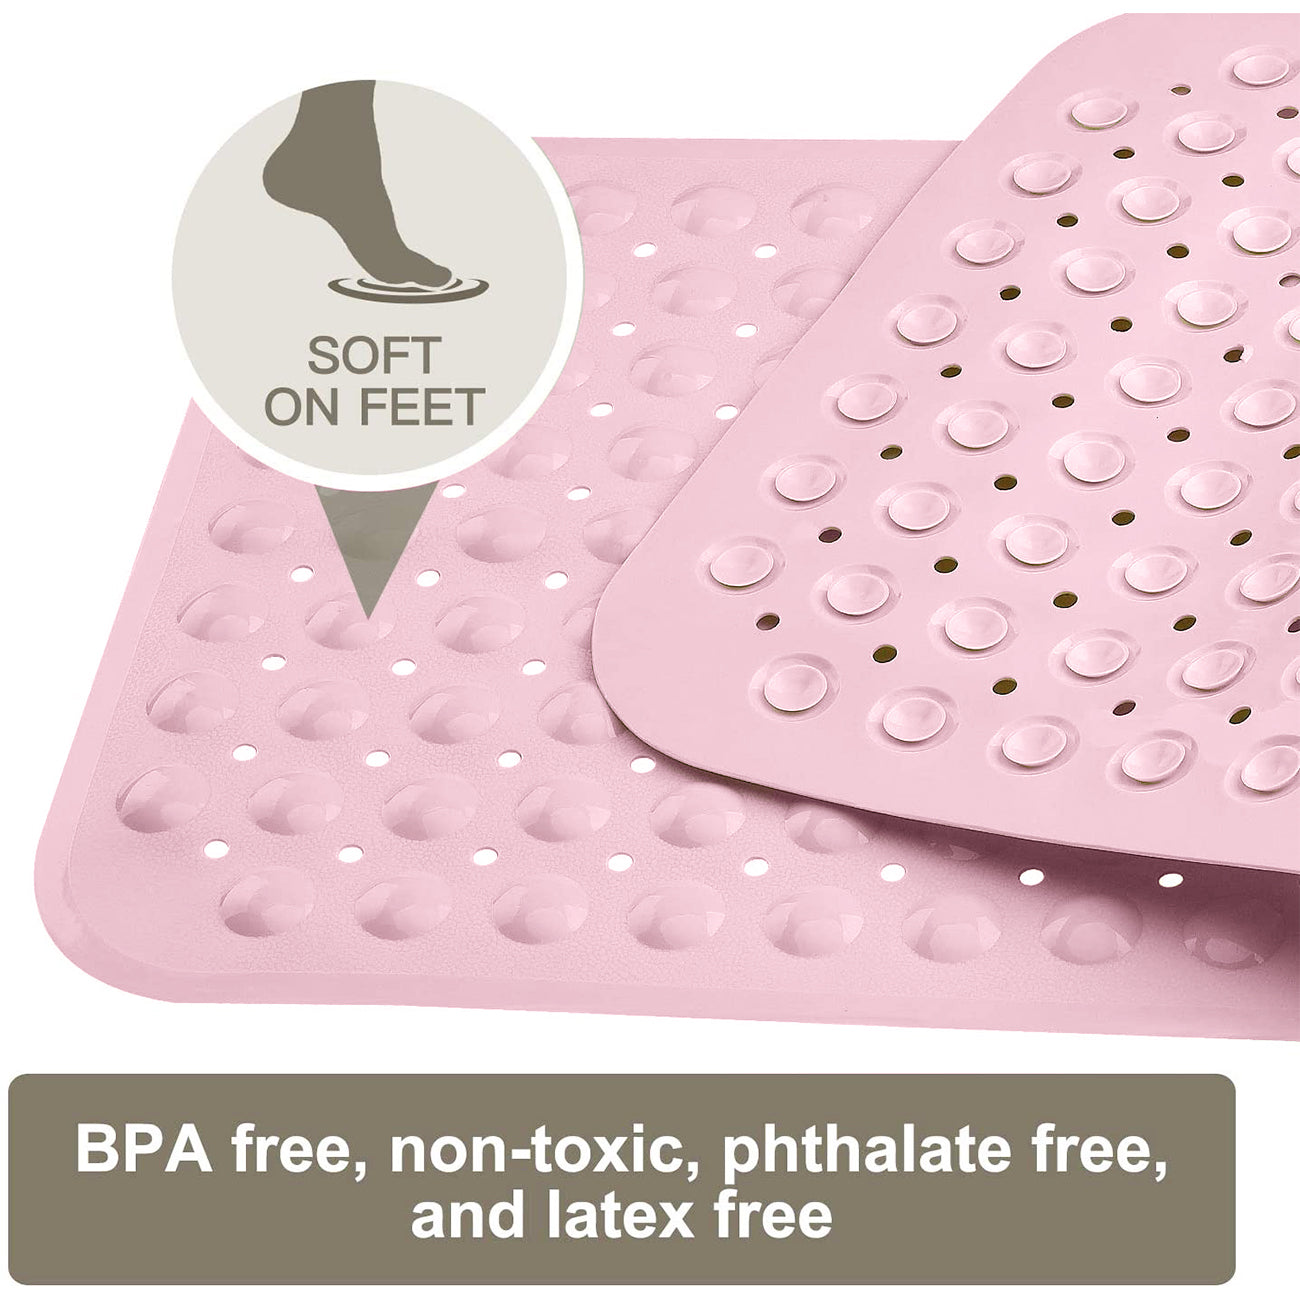 Experia Anti-Slip with Suction Cup Bath Mat, 88x58cm (Pink Color with Soft-Pebble) LifeKrafts